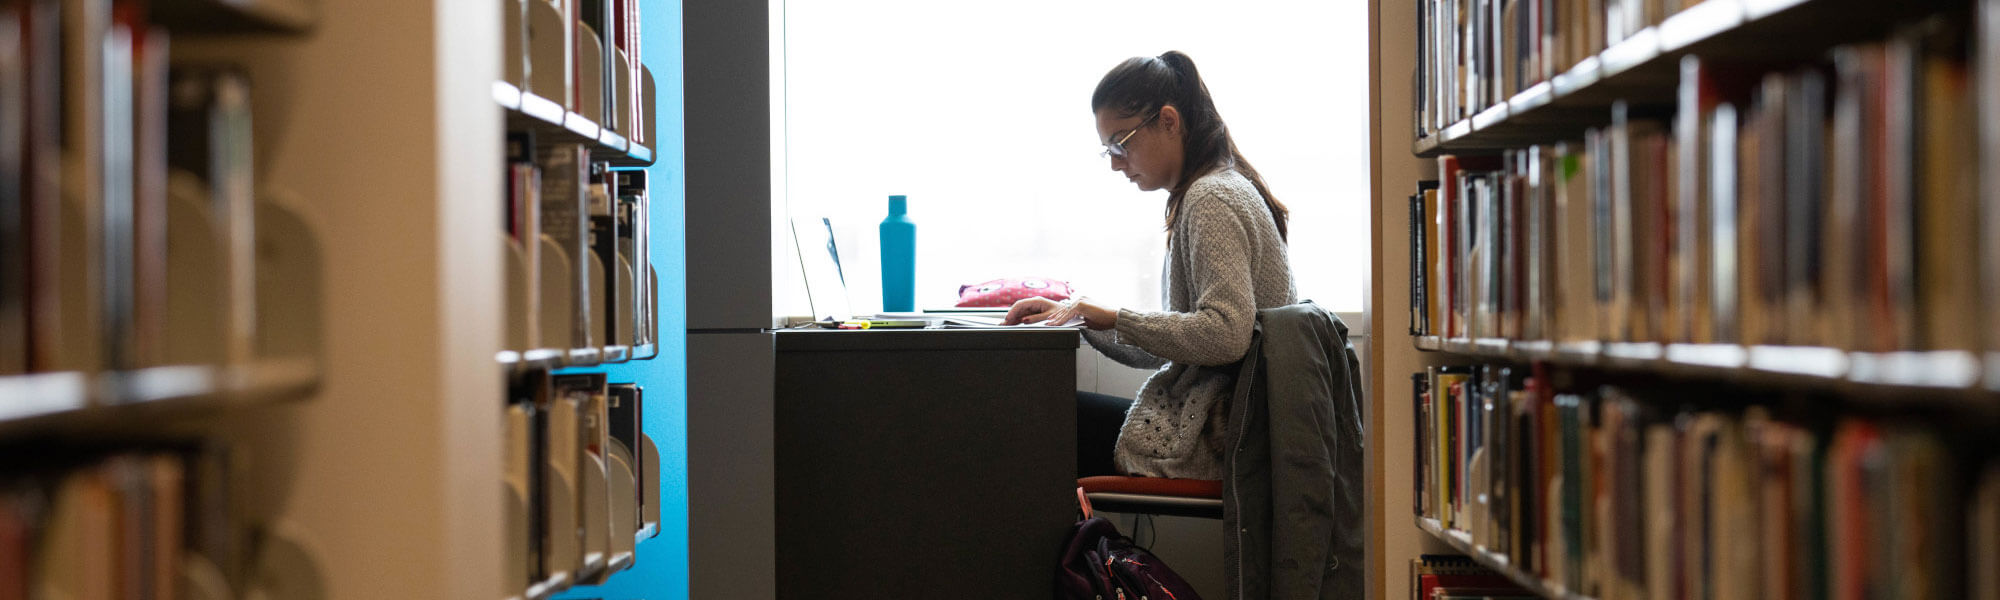 GVSU student at work in the Mary Idema Pew Library.